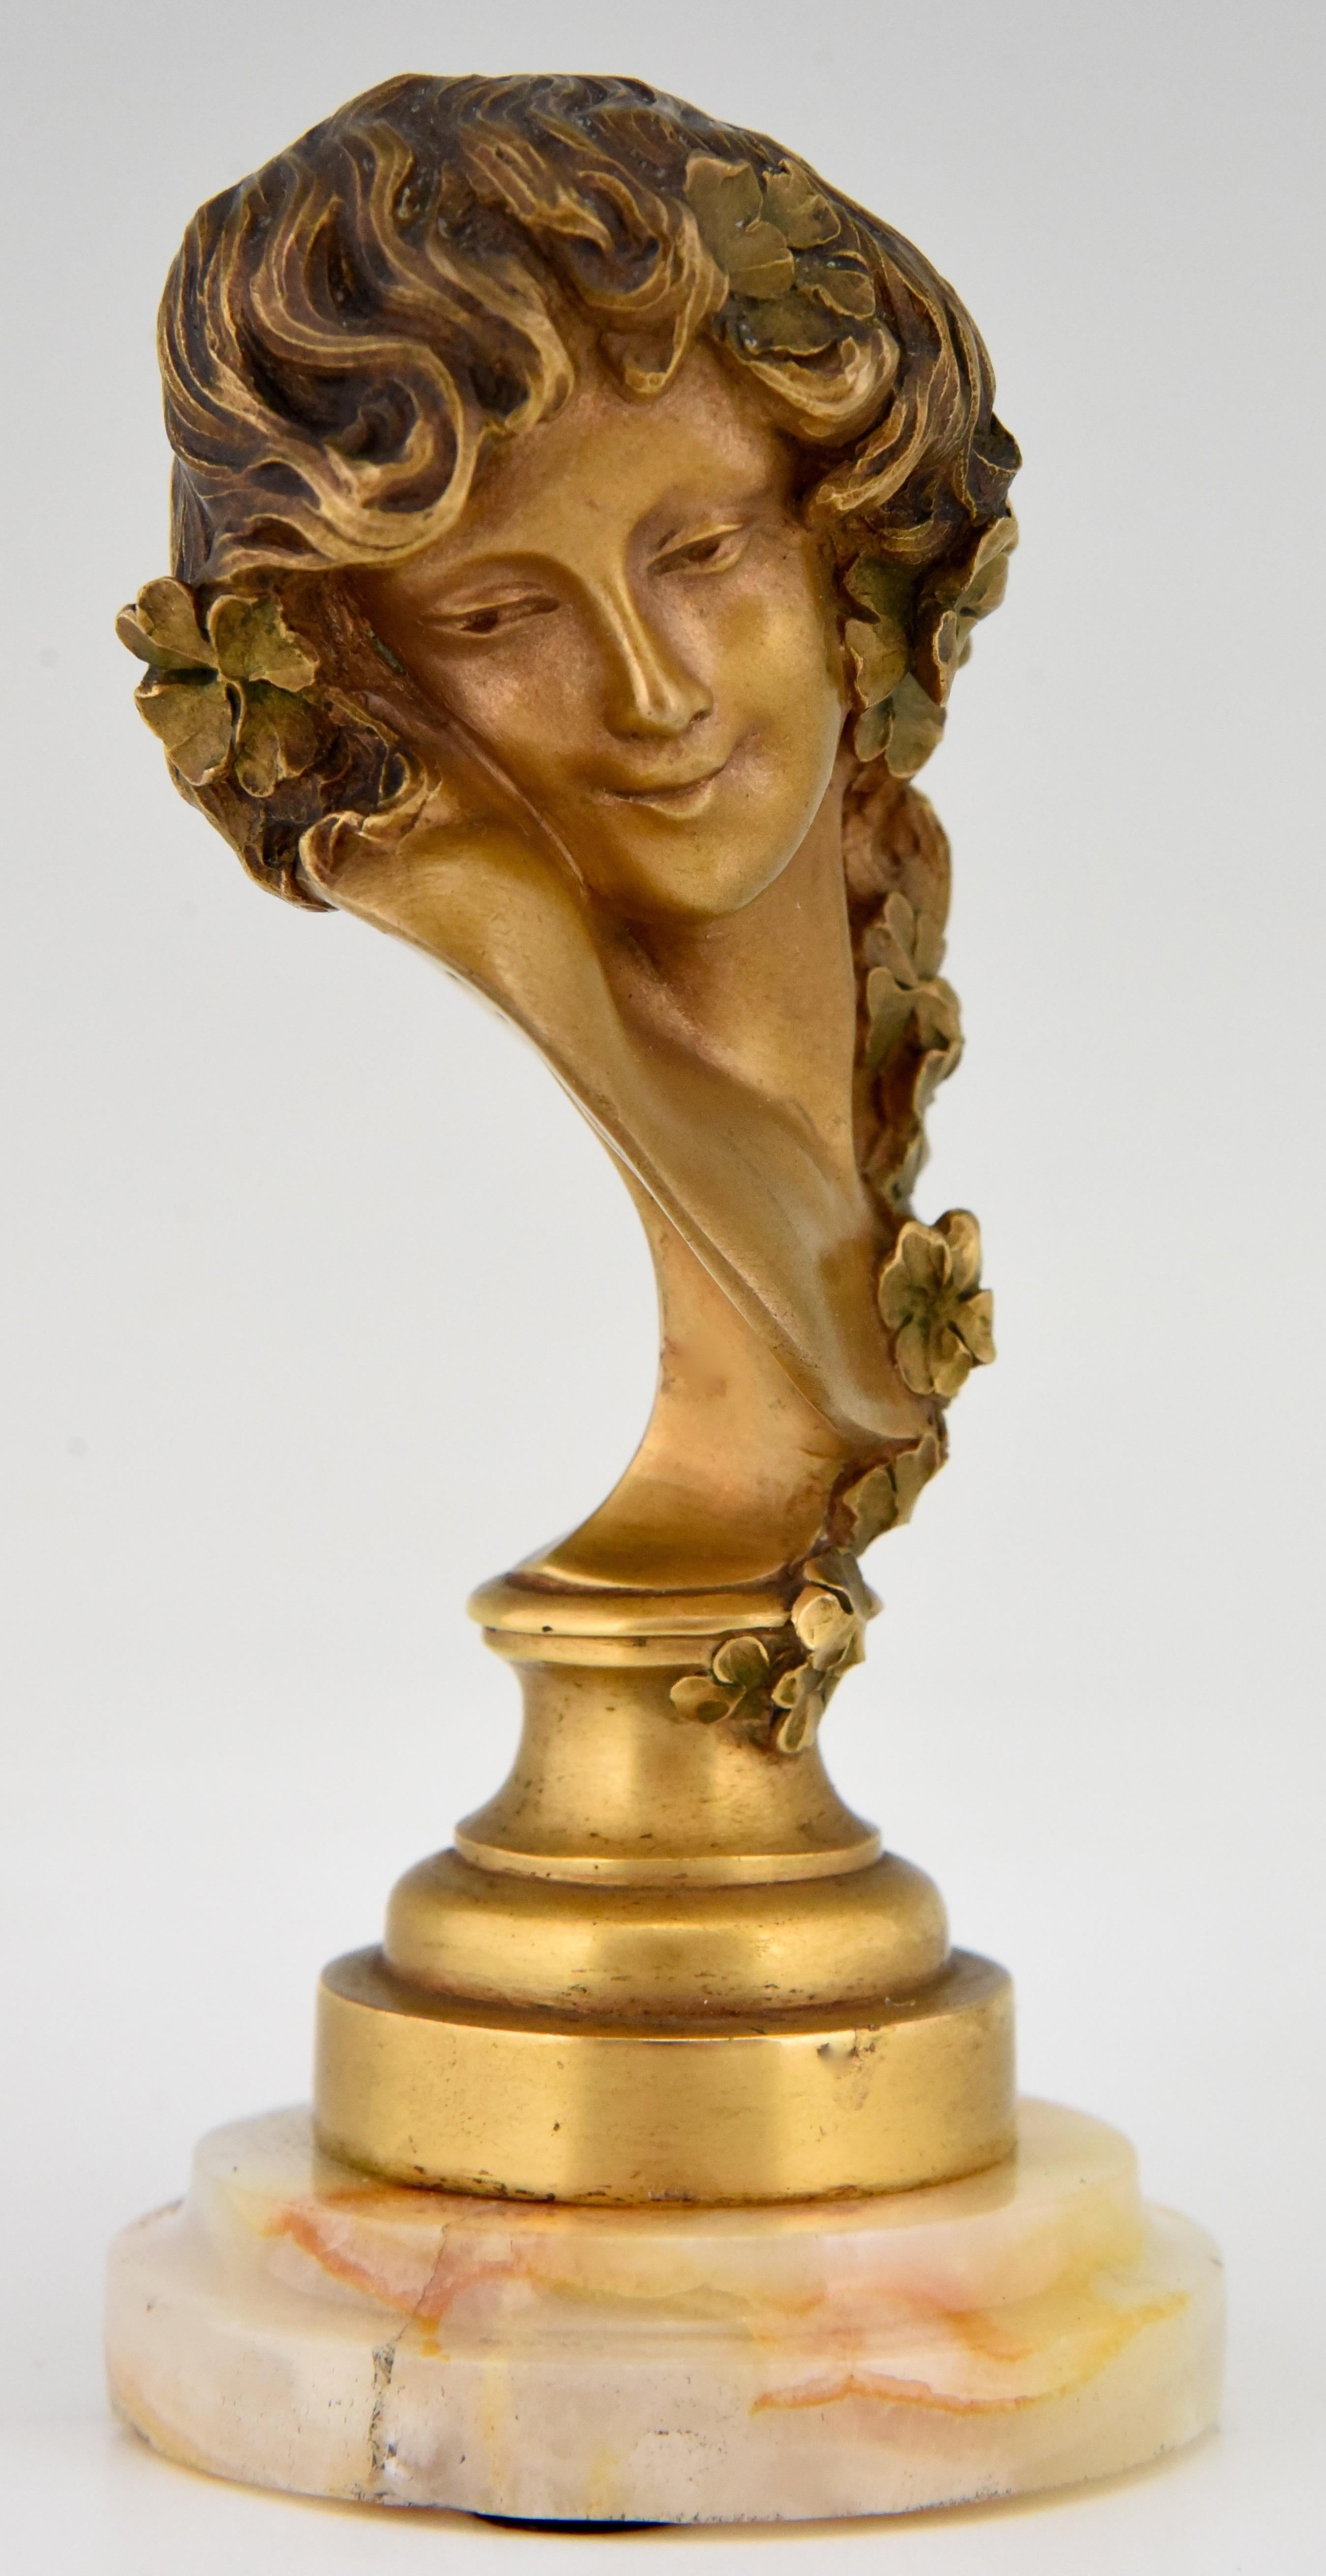 French Art Nouveau Bronze Bust Woman with Flowers Claire Roberte Jeanne Colinet, 1915